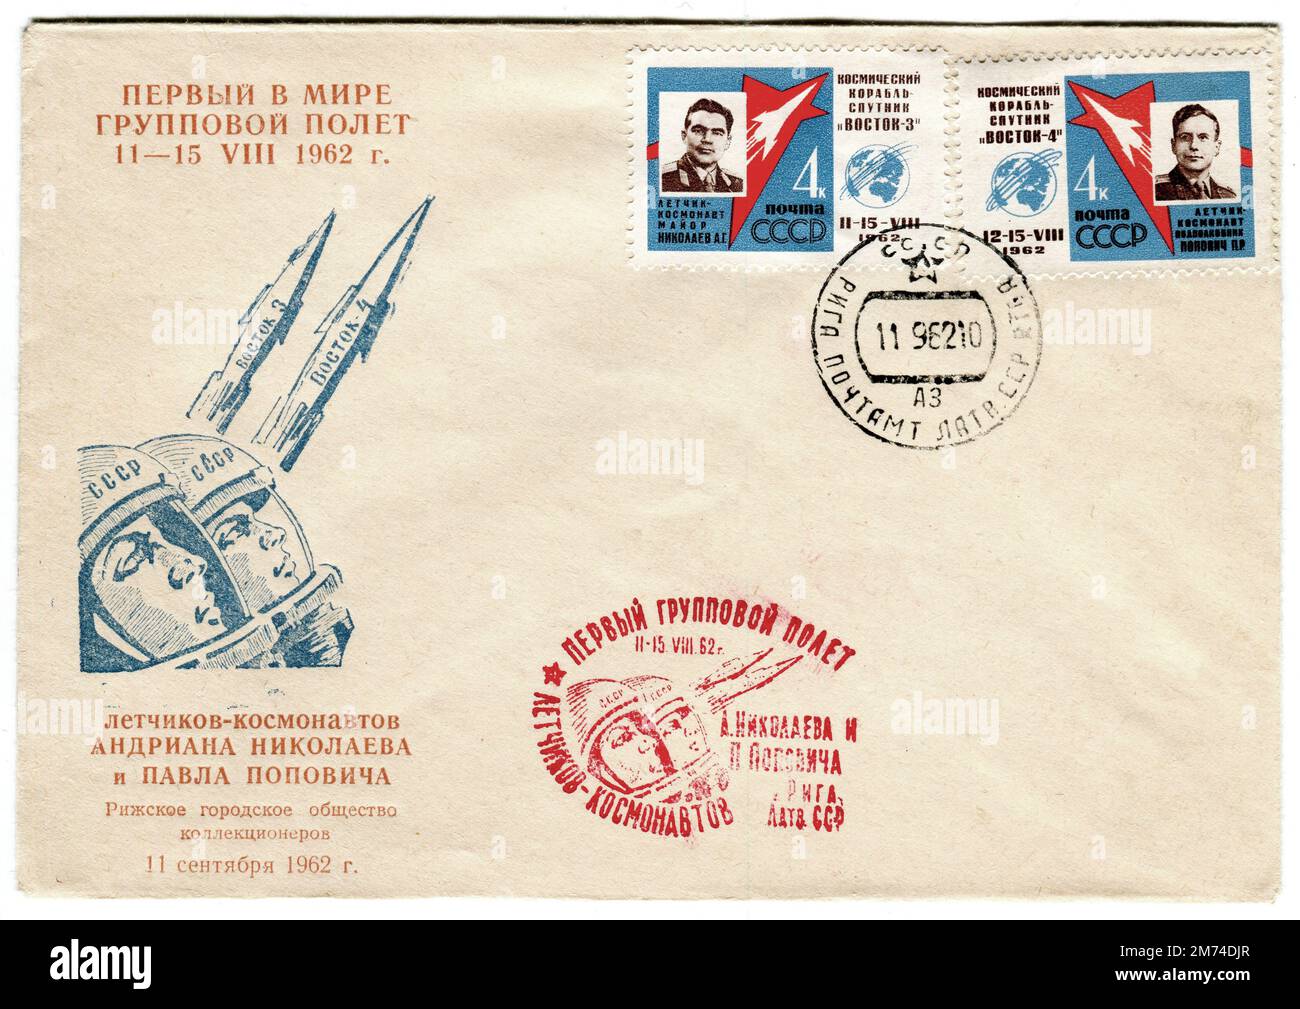 A vintage Soviet Russian space cover published on 11 September 1962 to commemorate the flights of Vostok 3 & Vostok 4. The cover is decorated with a stylized image of the two rockets, their cosmonaut pilots and the accompanying translated caption, “First in The World Group Flight 11-15 August  1962”, and “Cosmonauts Andriana Nikolaev and Paul Popovich - Riga City Society Collectors -September 11, 1962”. Vostok 4 was a Soviet space program mission which was launched in August 1962, a day after Vostok 3; the first time that more than one crewed spacecraft were in orbit at the same time. Stock Photo